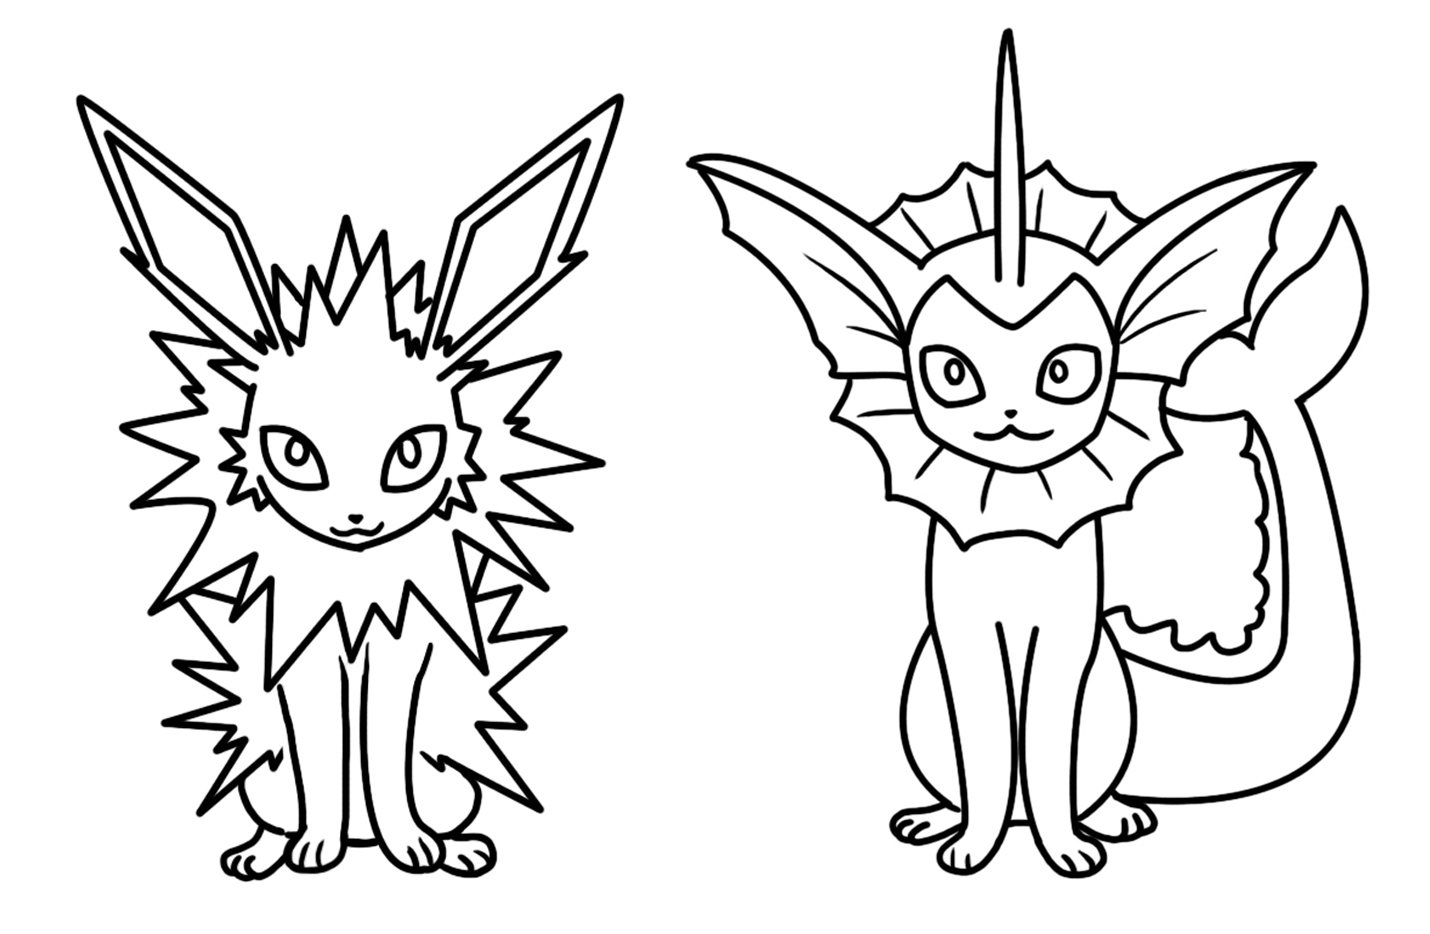 Jolteon And Vaporeon Coloring Page By Bellatrixie White On Deviantart